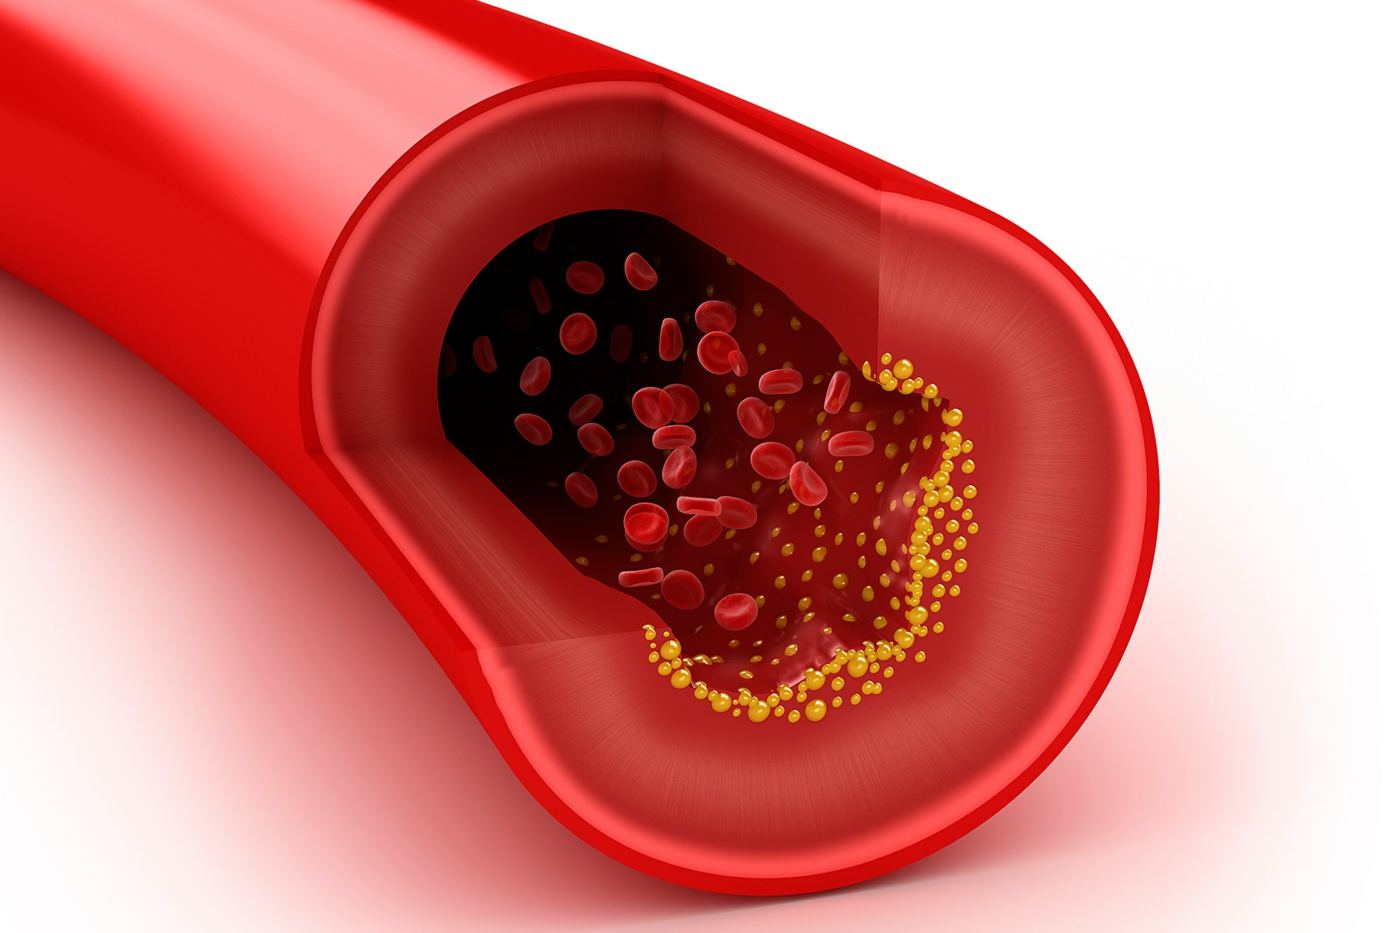 Cholesterol values ​​were determined to lower the risk of infections